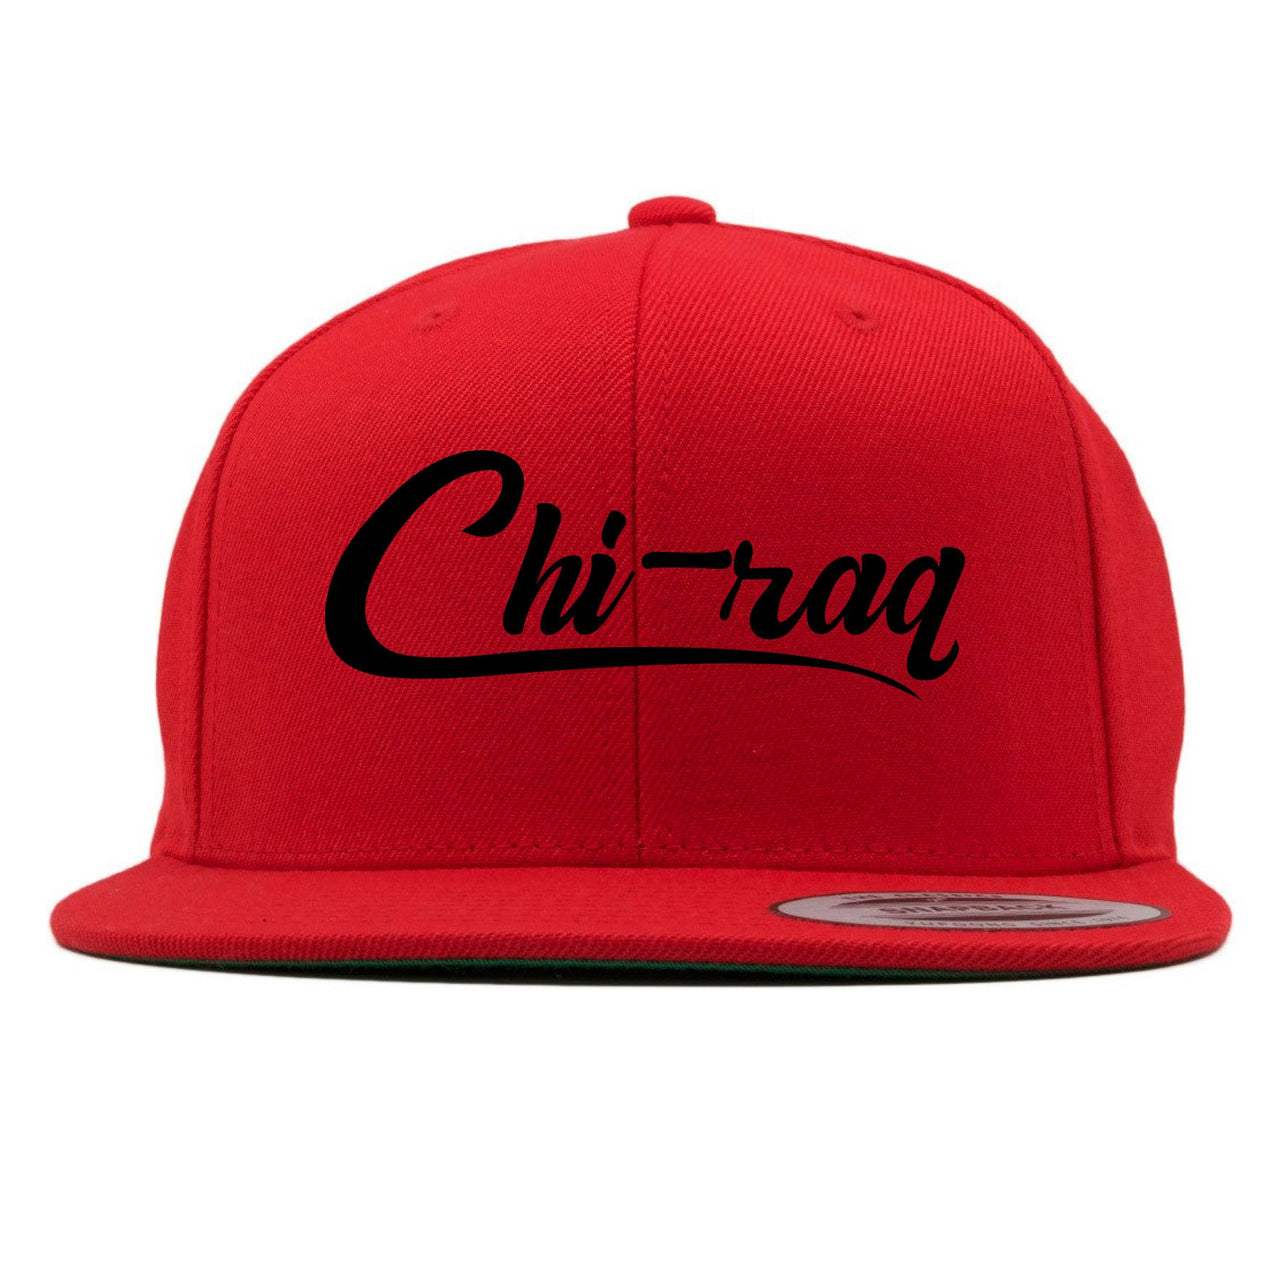 Reflections of a Champion 8s Snapback | Chiraq Script, Red